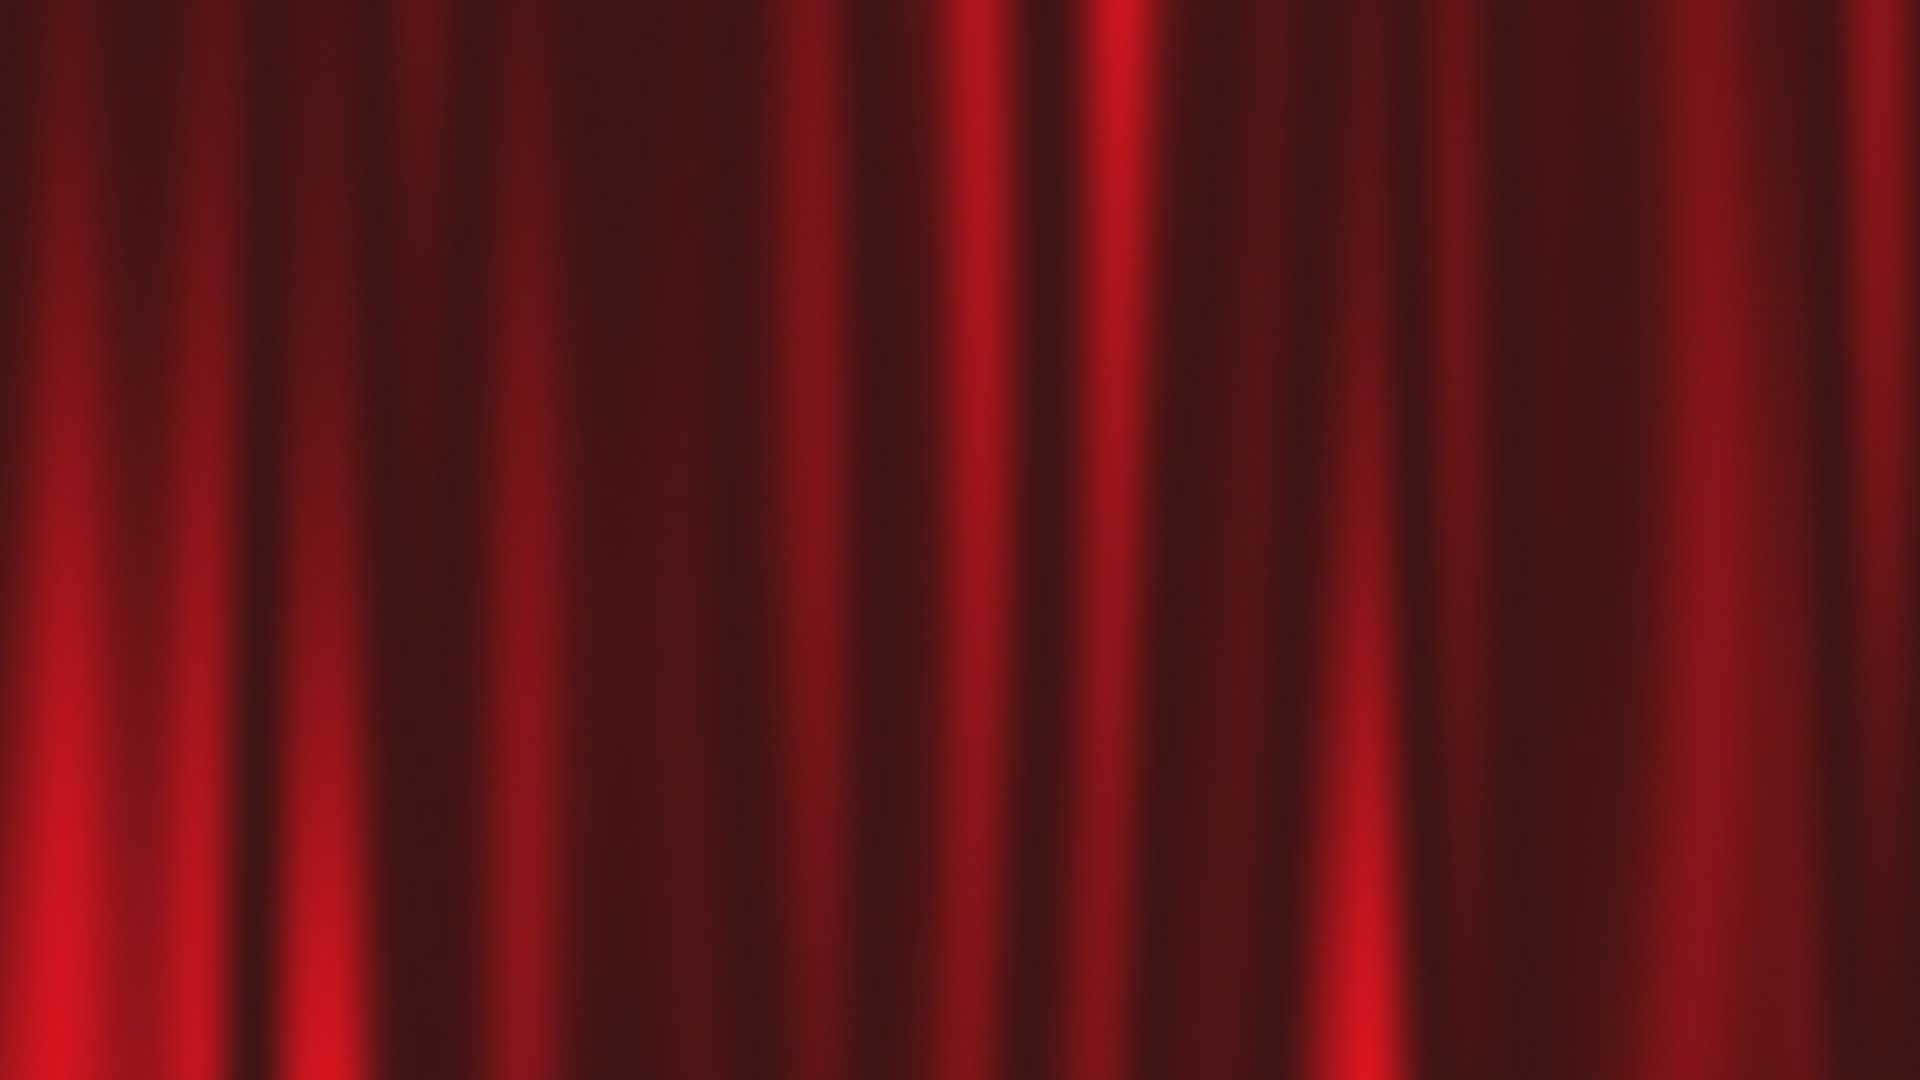 A luxurious red curtain beaming with vibrance